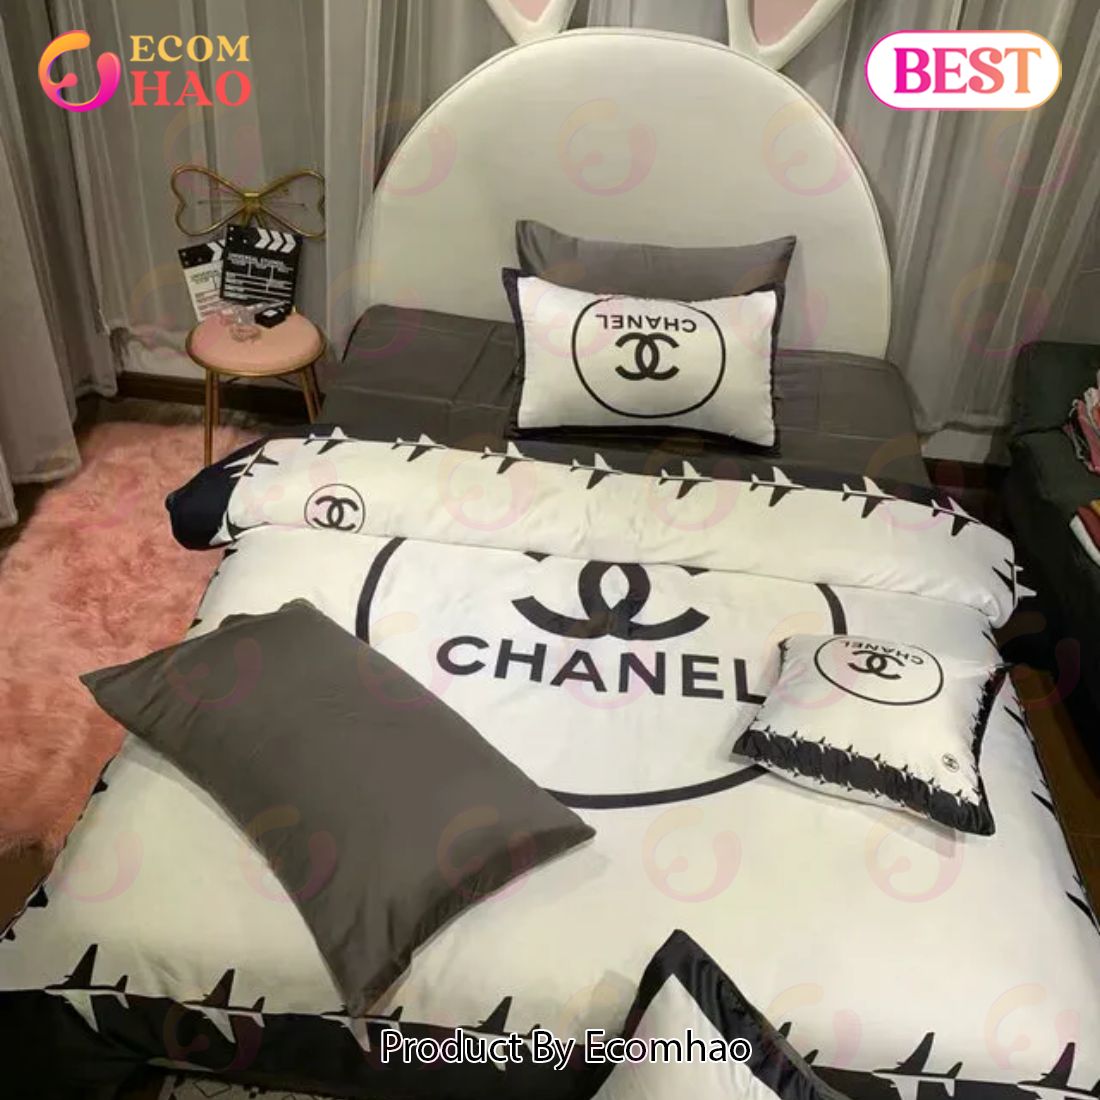 Chanel Logo White Printed Bedding Sets Quilt Sets Duvet Cover Luxury Brand Bedding Decor Bedroom Sets Best Luxury Bed Sets Gift Thankgivings And Christmas